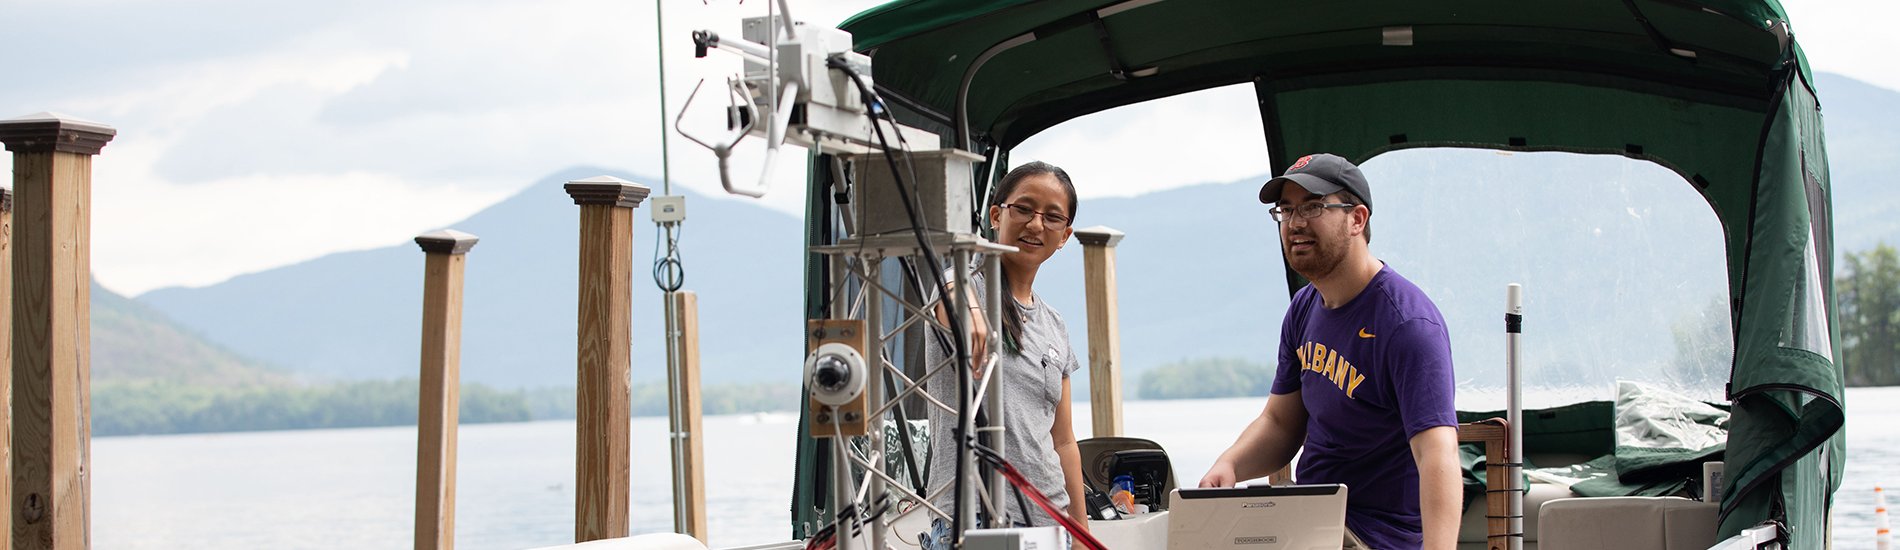 Students of the Atmospheric Sciences Research Center (ASRC), funded through $500,000 in support from the Department of Energy (DOE), works on a buoy-based flux measurement system at Lake George on Wednesday, June 30, 2021. (photo by Patrick Dodson)